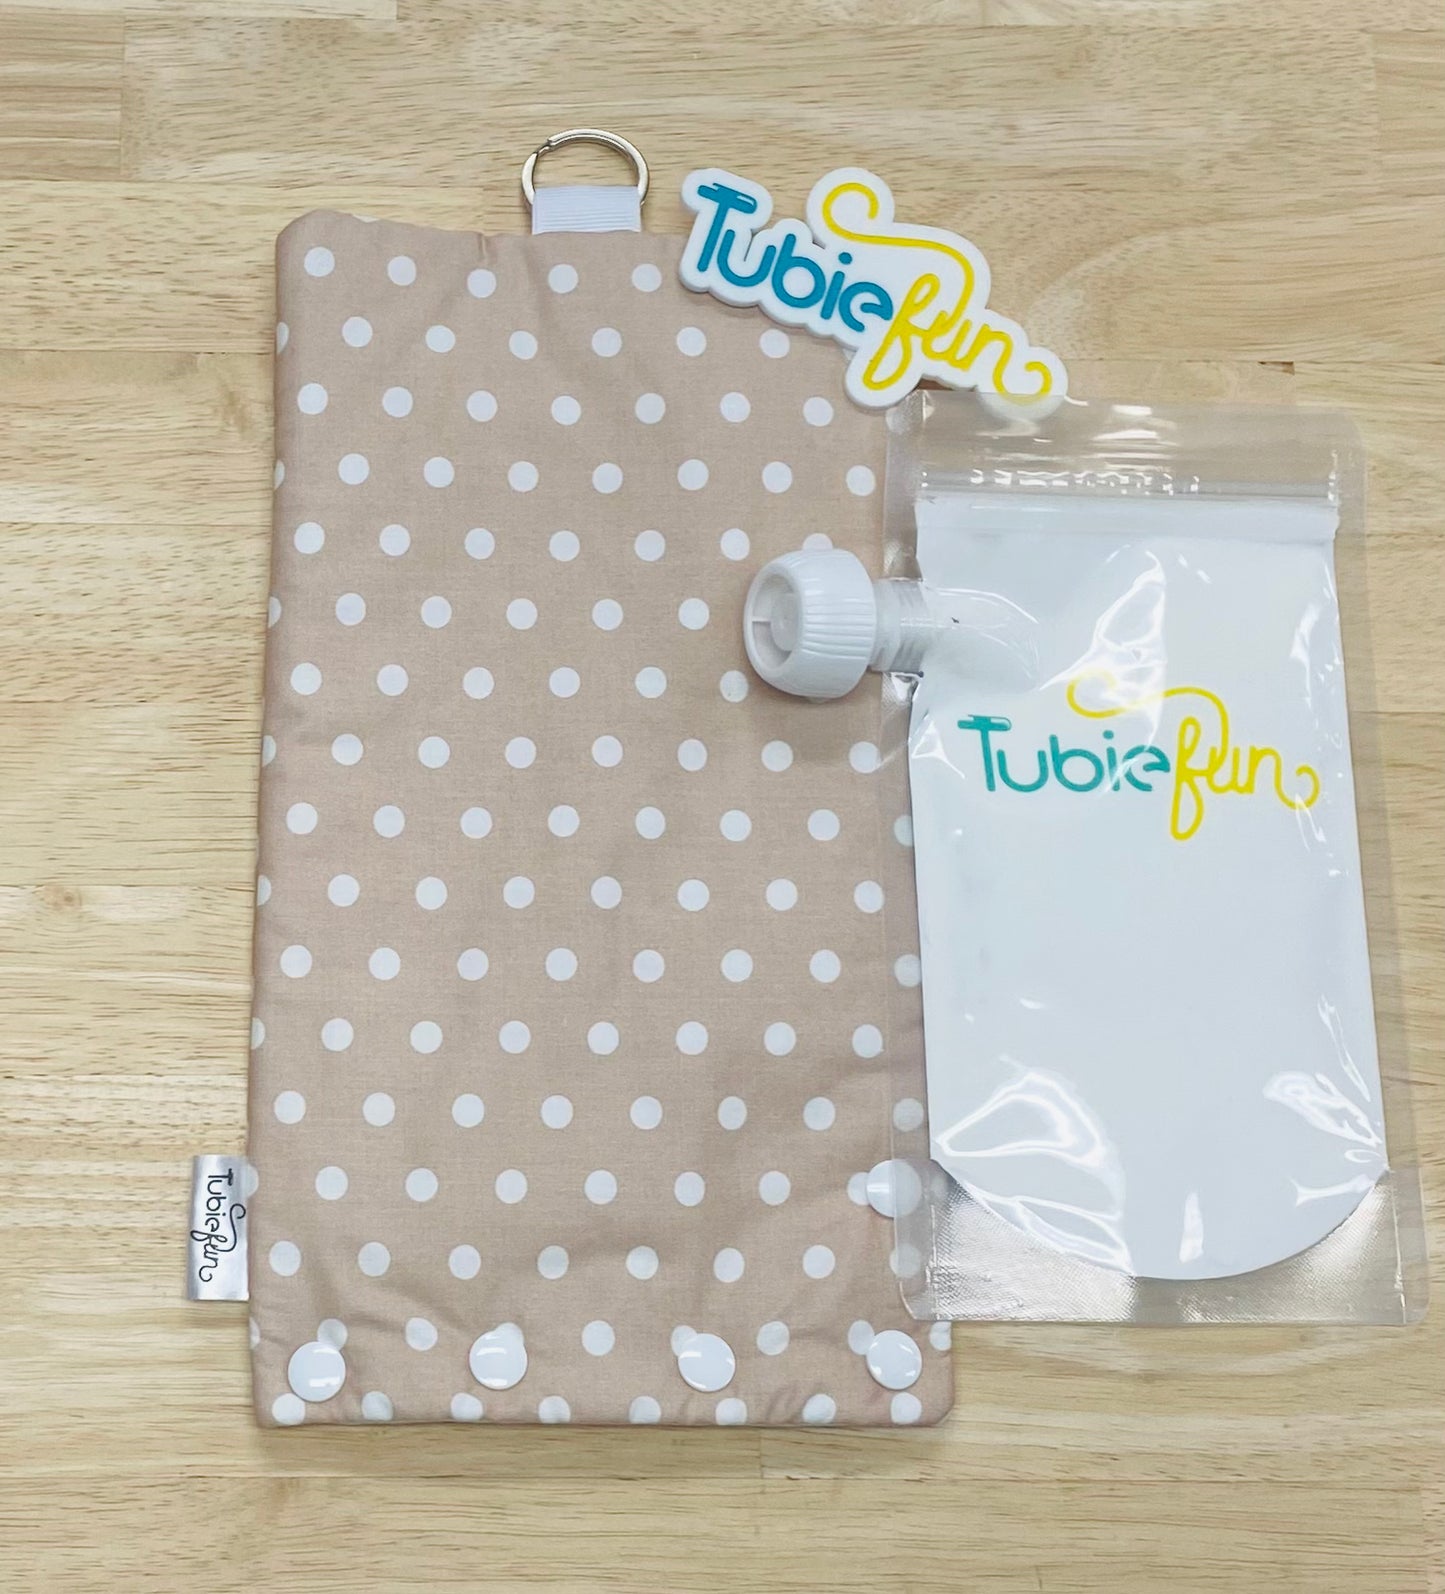 Insulated Milk Bag Suitable for Tubie Fun 500ml Reusable Pouches - White Spots on Tan